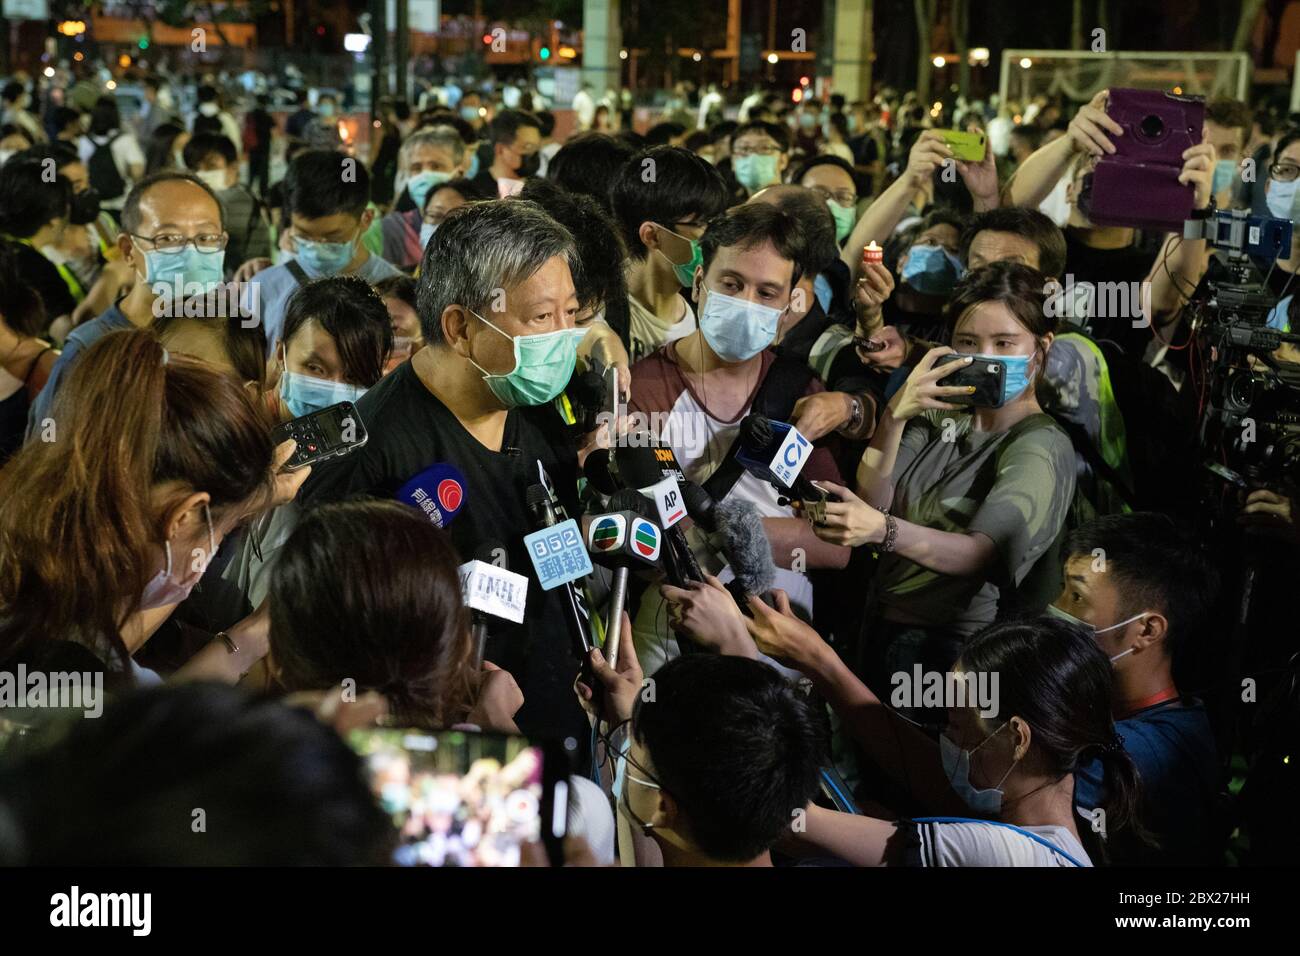 Causeway Bay, Hong Kong. 04, June, 2020. Activist speaks to the press about holding the illegal gathering despite laws cracking down on free speach in Hong Kong.  © Danny Tsai / Alamy Live News Stock Photo